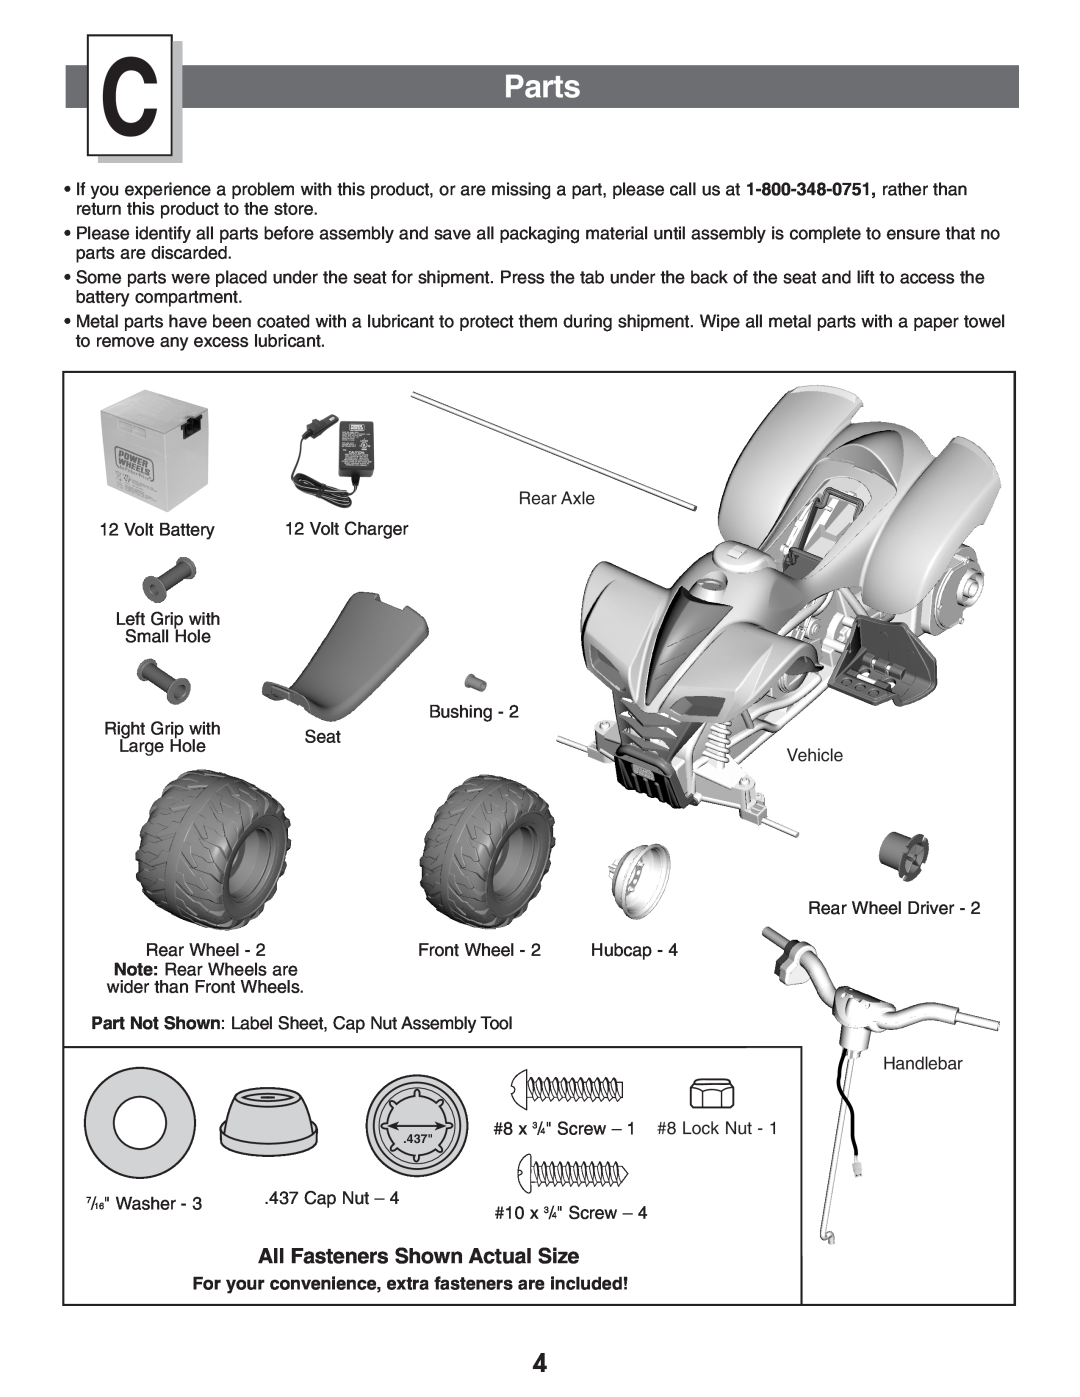 Kawasaki B9272 owner manual Parts, For your convenience, extra fasteners are included 